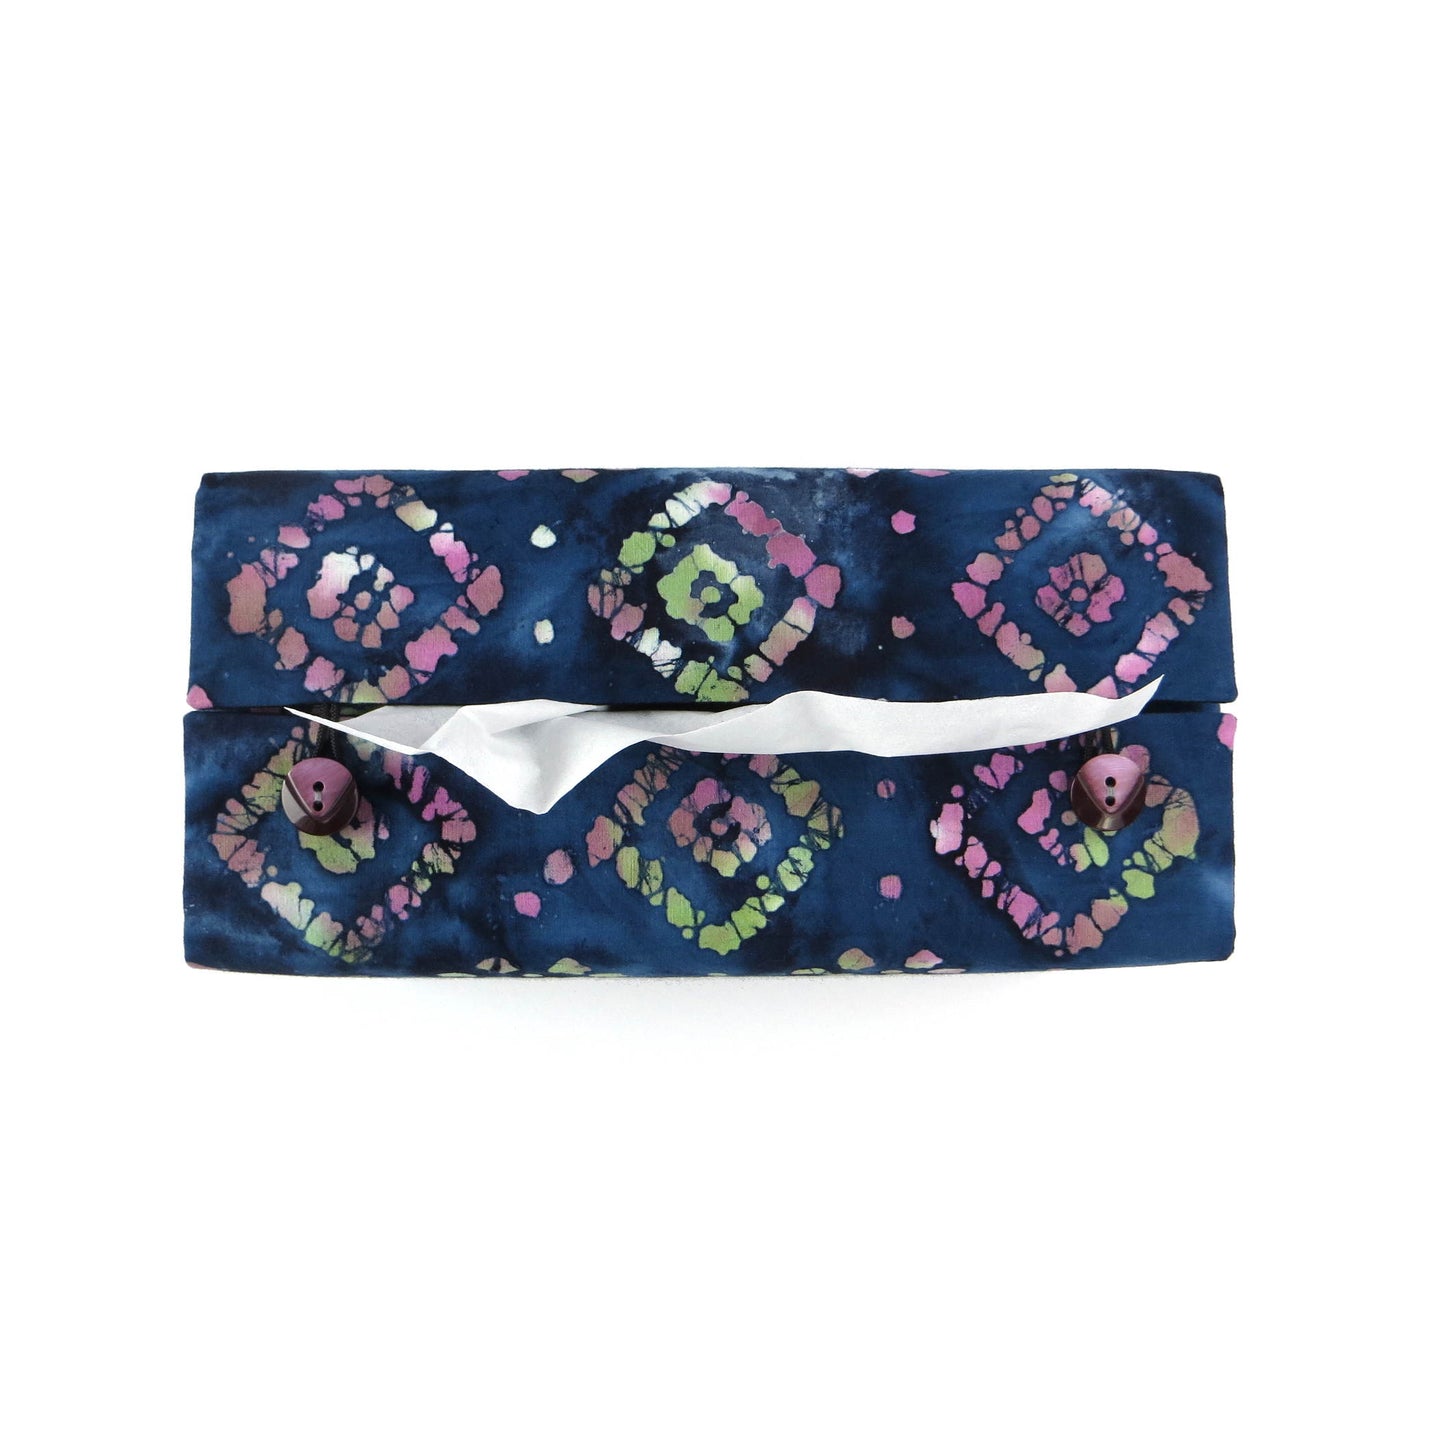 Batik printed cotton rectangle tissue box cover with tie dye magenta and green diamond design on blue background